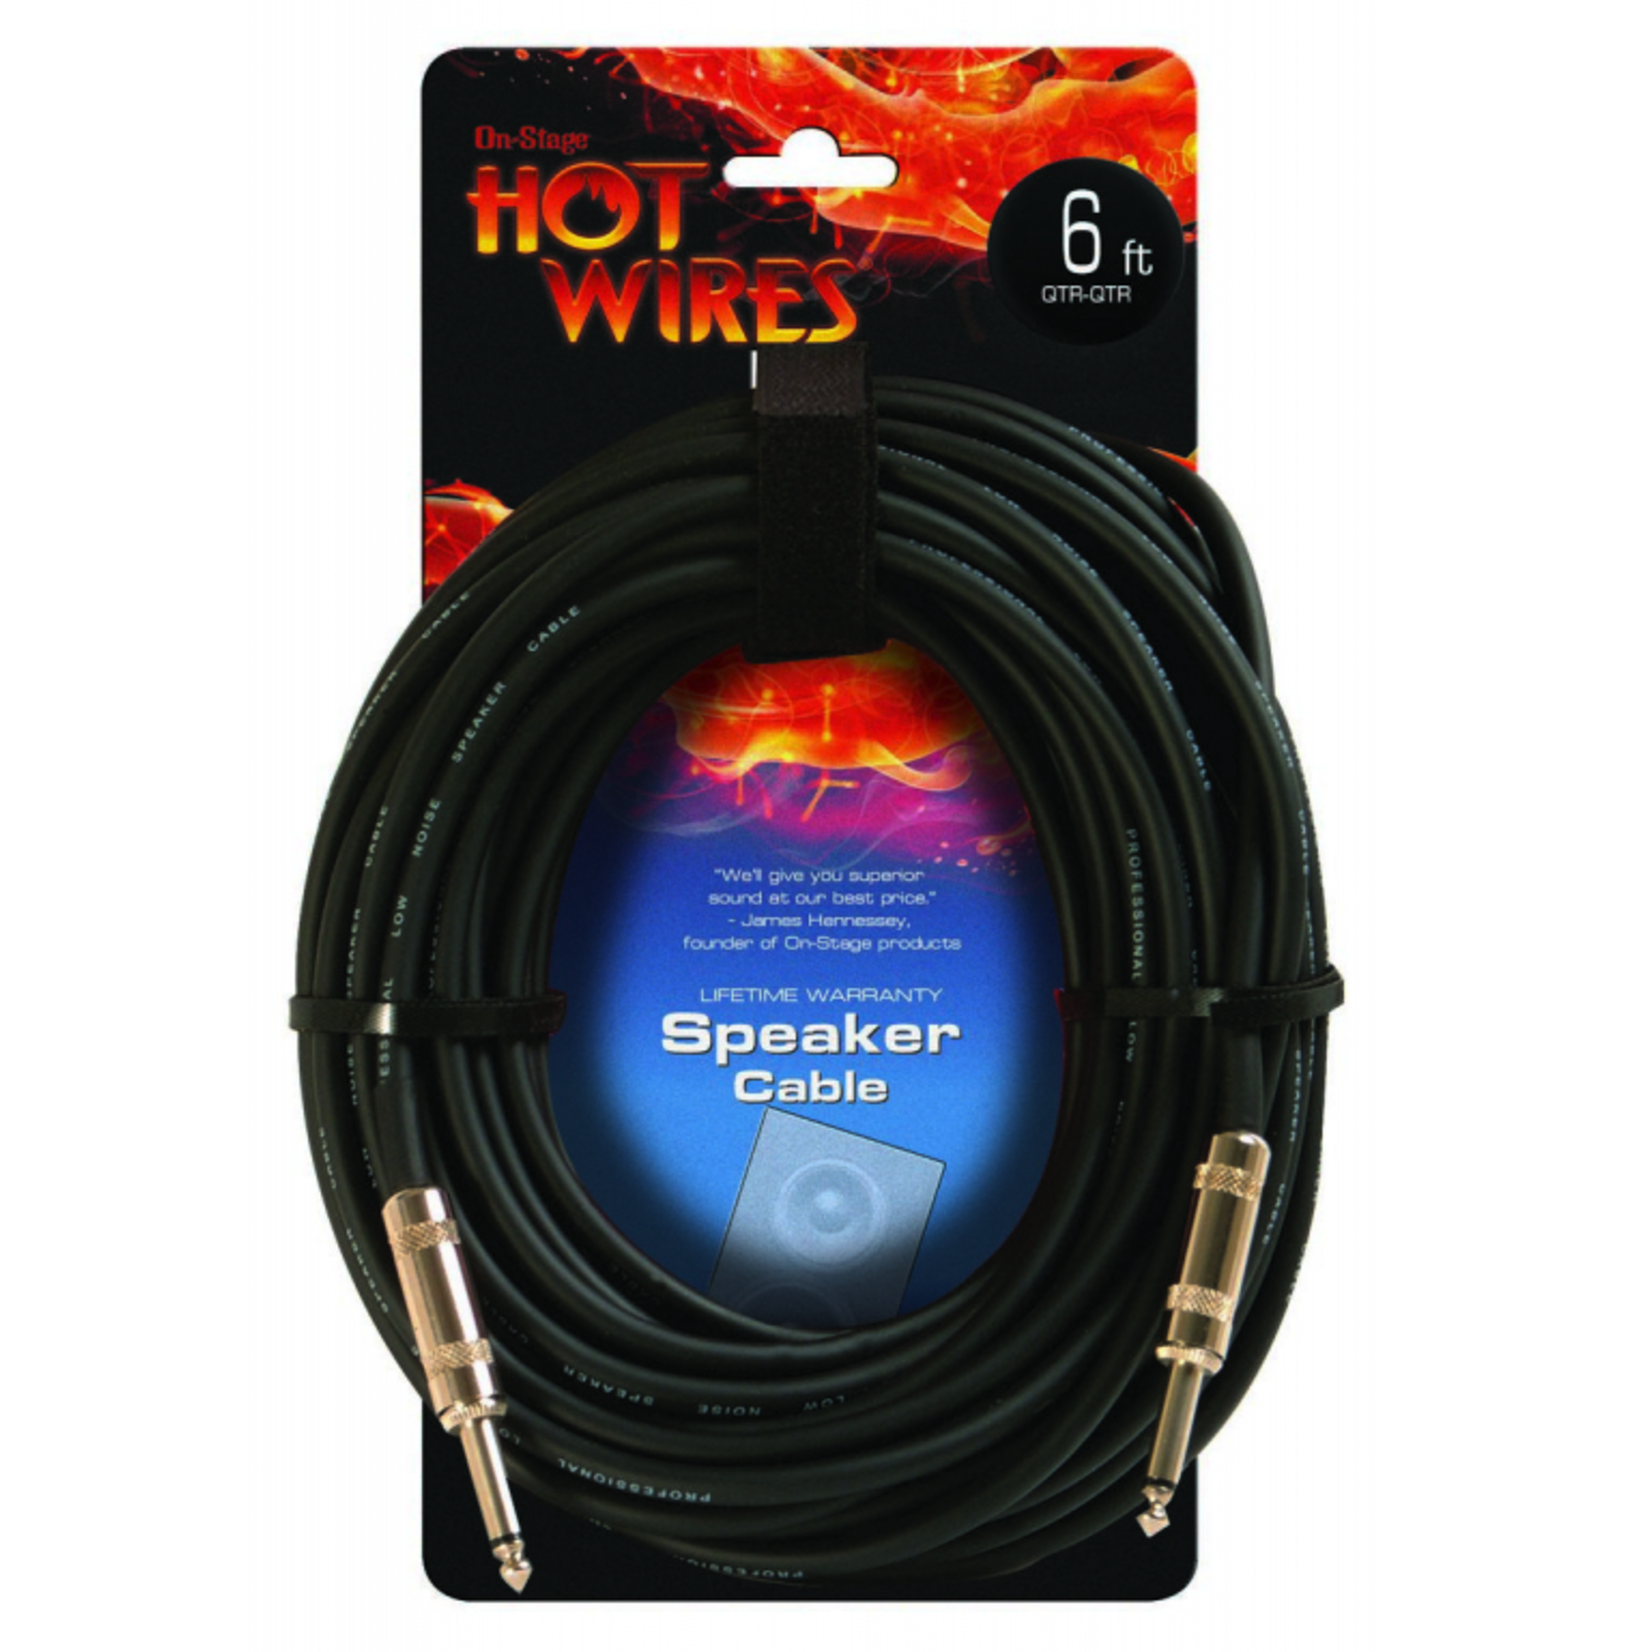 Hot Wire Speaker Cable 1/4" - 6 Ft